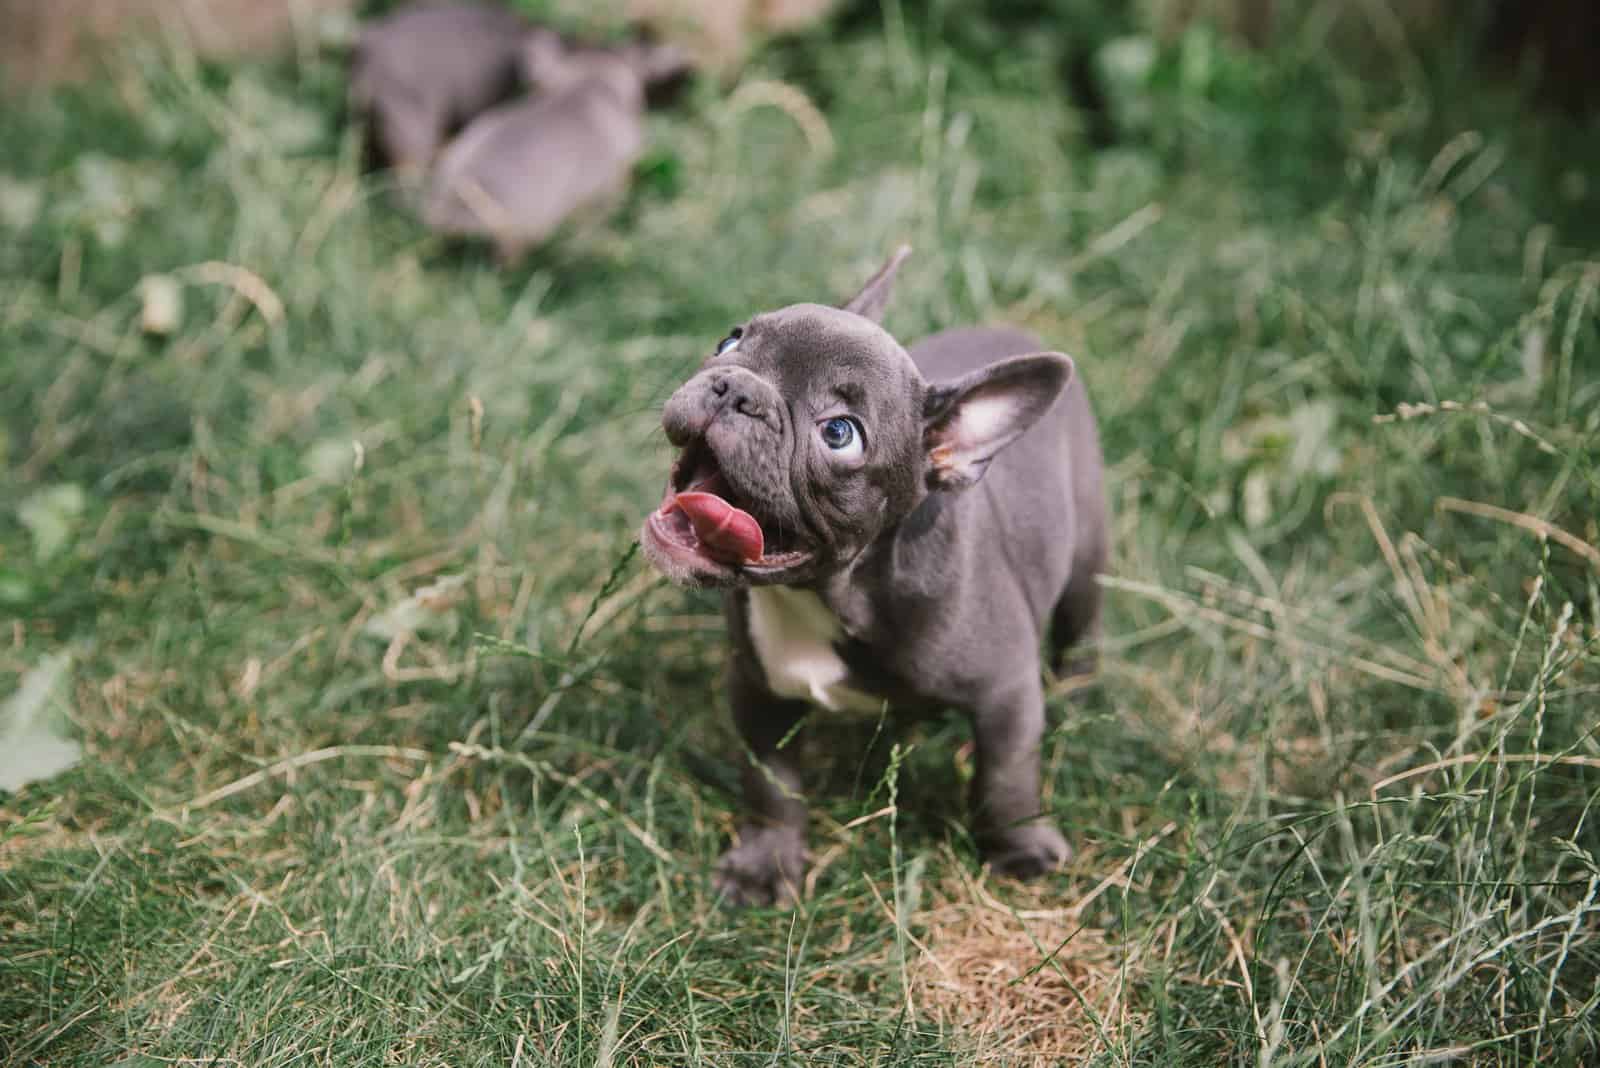 Adorable french bulldog puppy standing in the grass